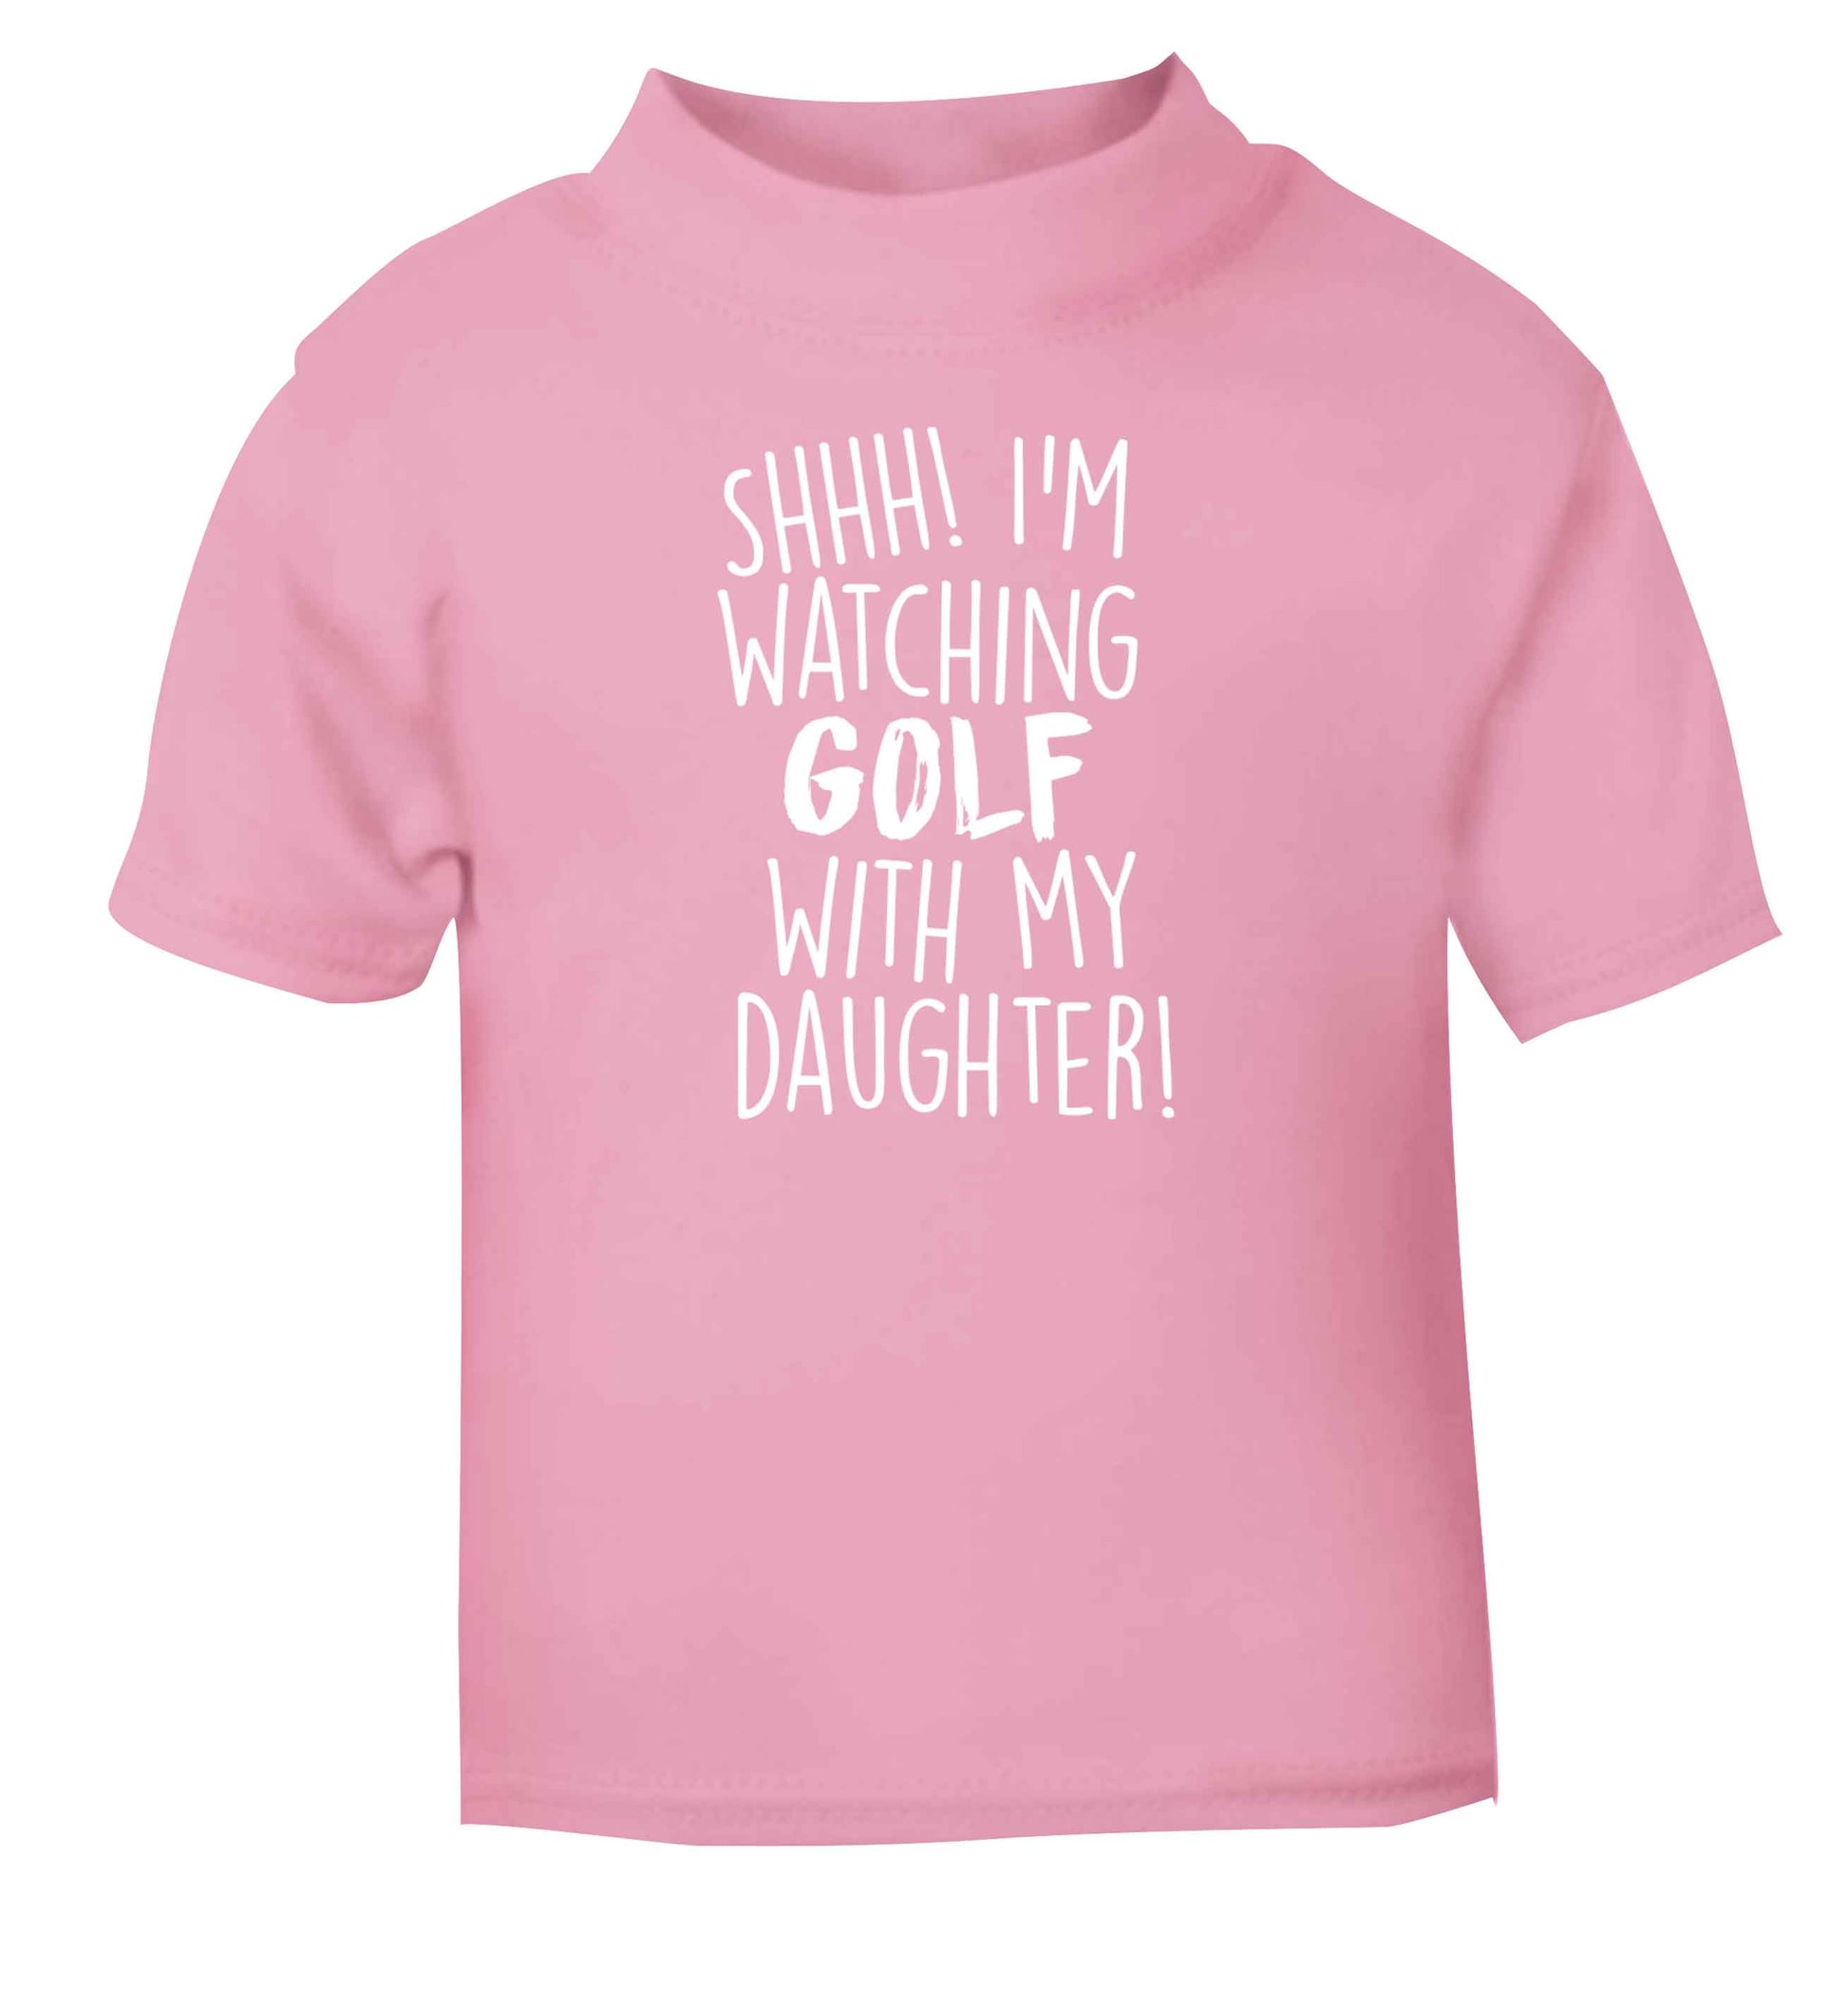 Shh I'm watching golf with my daughter light pink Baby Toddler Tshirt 2 Years